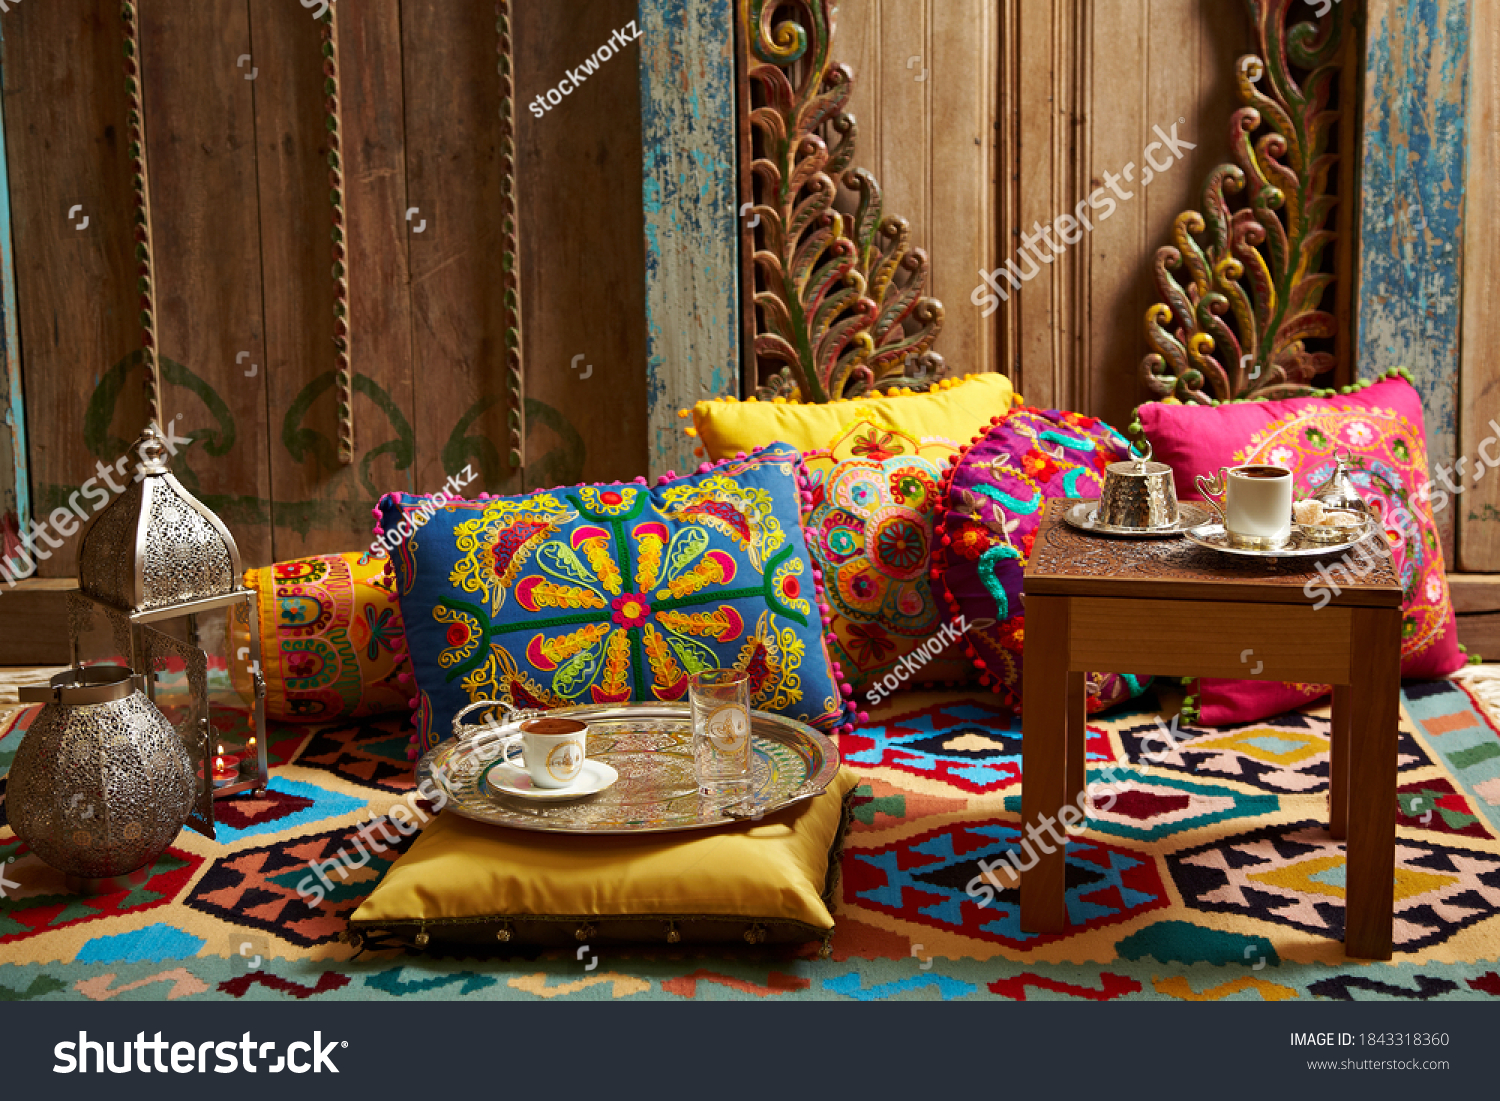 carved wood design pillows embroidered with fluorescent colors in front of the wall oriental corner turkish coffee presentation #1843318360